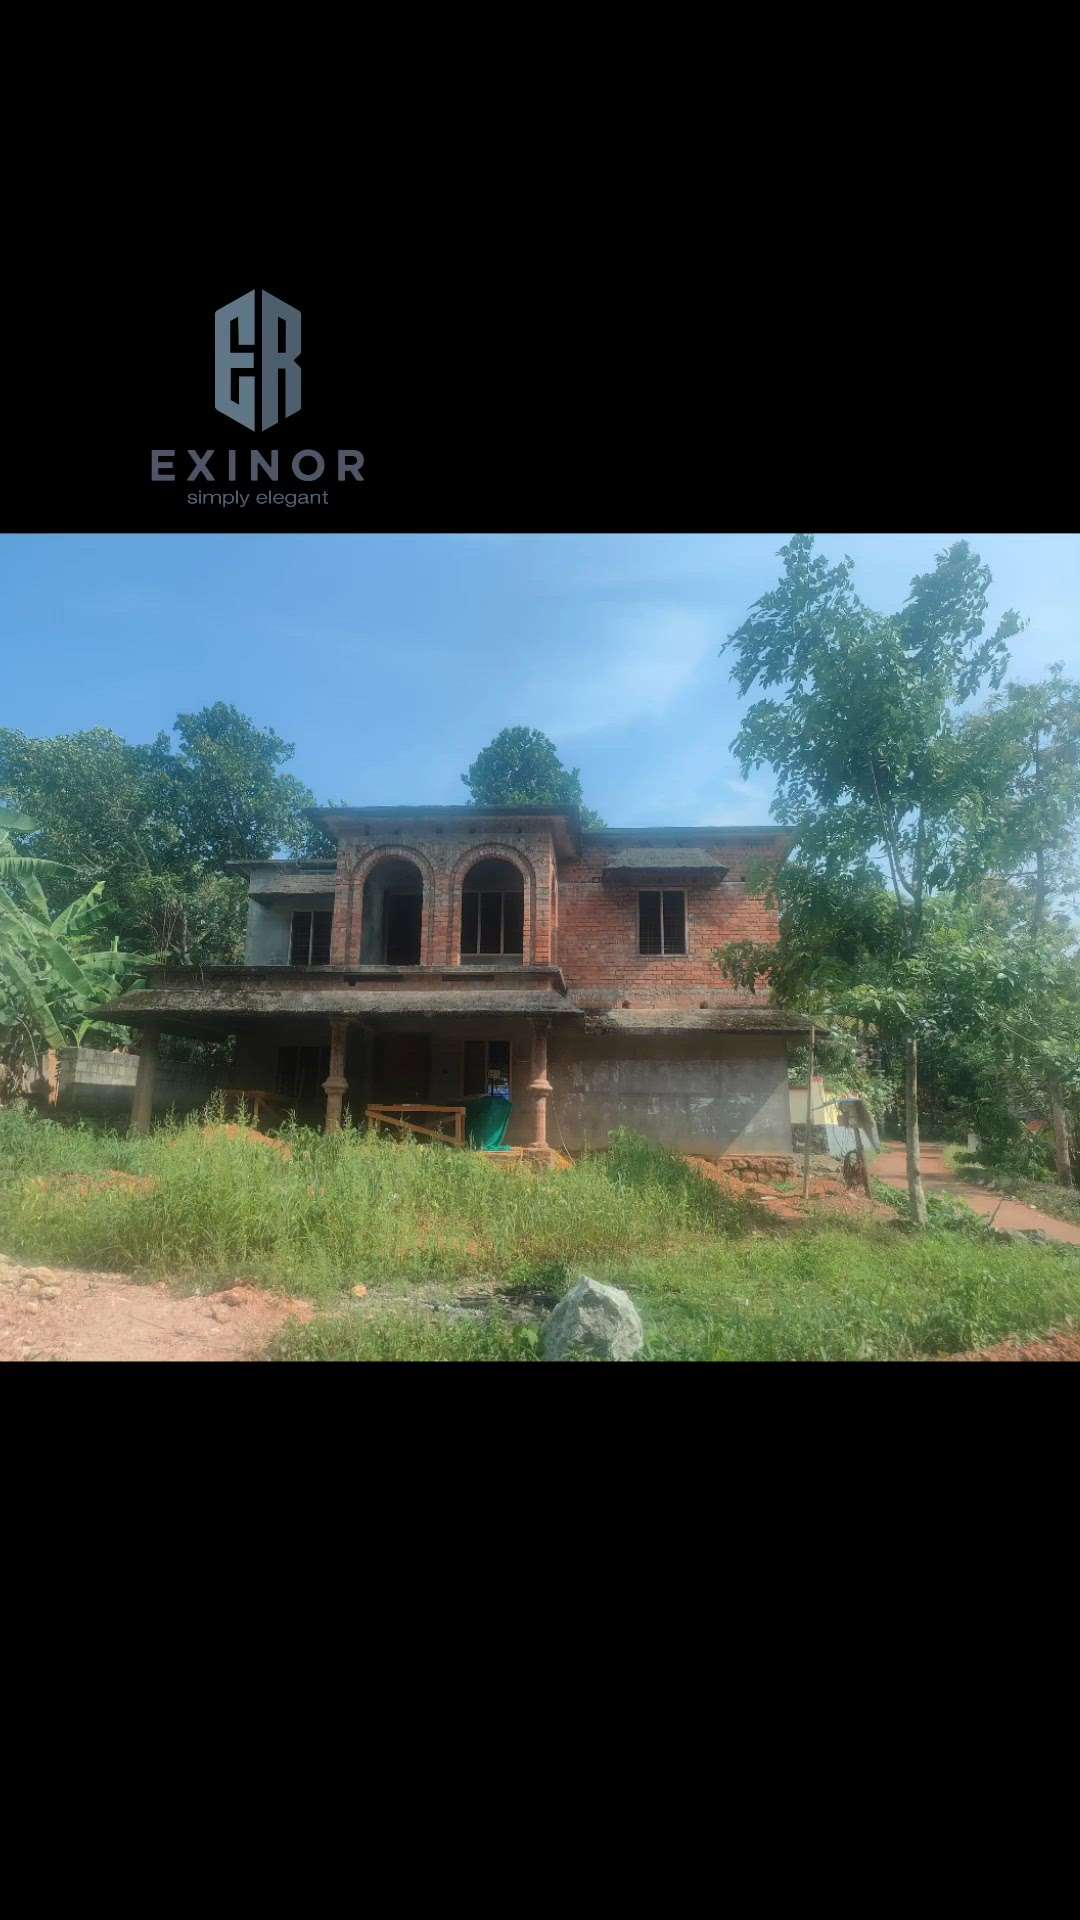 Renovation Project at Kottarakkara /exinor_designs

Client : Mr & Mrs Prakash A S

Area : 2550 sqft

Year : 2023

Status: Ongoing 
.
.
.
.
🎨Designed & Rendered by @exinor_designs

Contact for Designing -8113969296,7306574415
.
.
.
.
#homedesign #homedecor #interiordesign #design #home #interior #architecture #decor #homesweethome #interiors #decoration #furniture #interiordesigner #homedecoration #interiordecor #luxury #art #interiorstyling #homestyle #livingroom #inspiration #designer #handmade #homeinspiration #homeinspo #house #realestate #kitchendesign #style #homeinterior